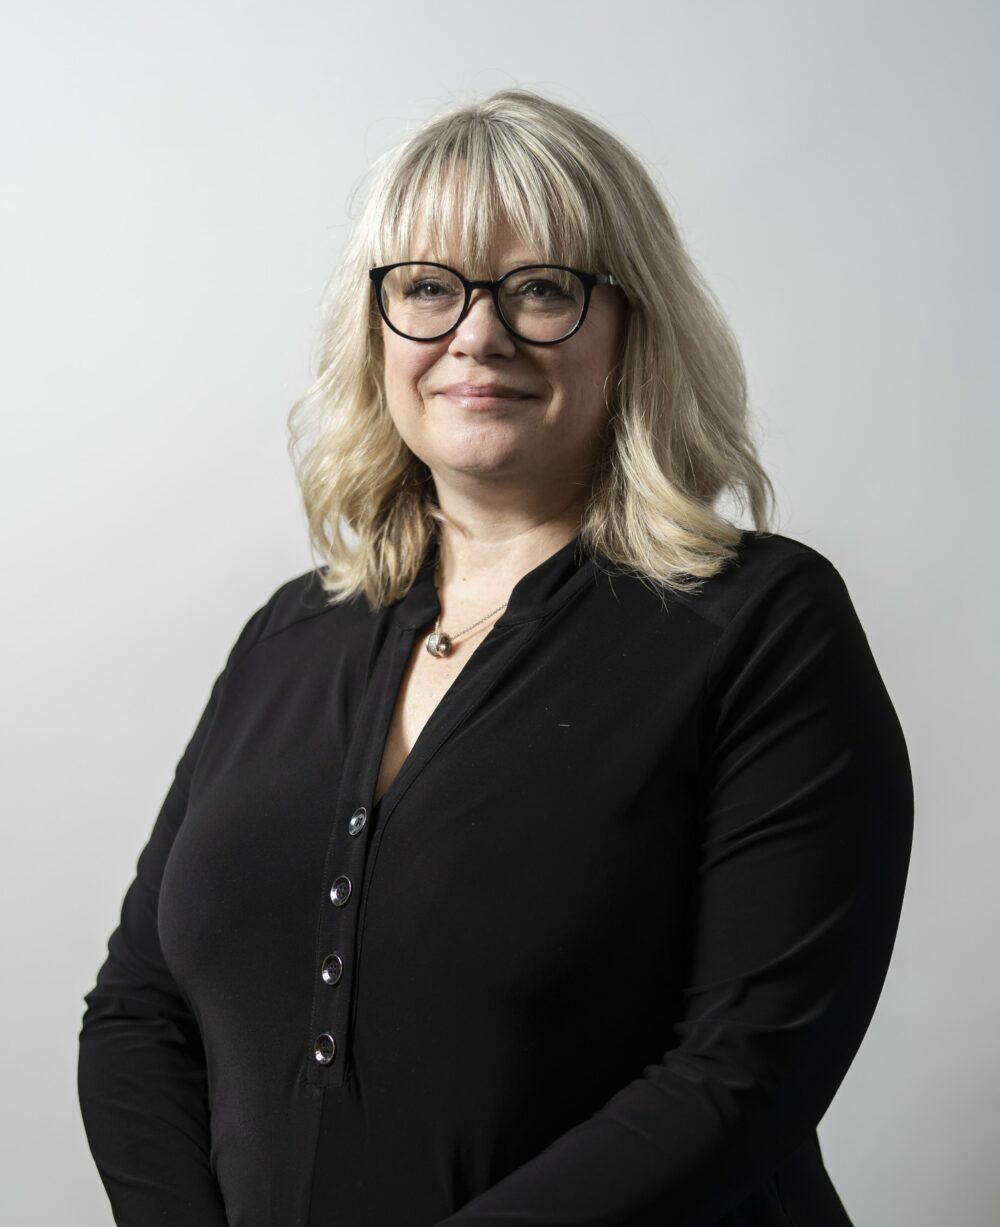 Meet our Commercial Director, Rebecca Louvre